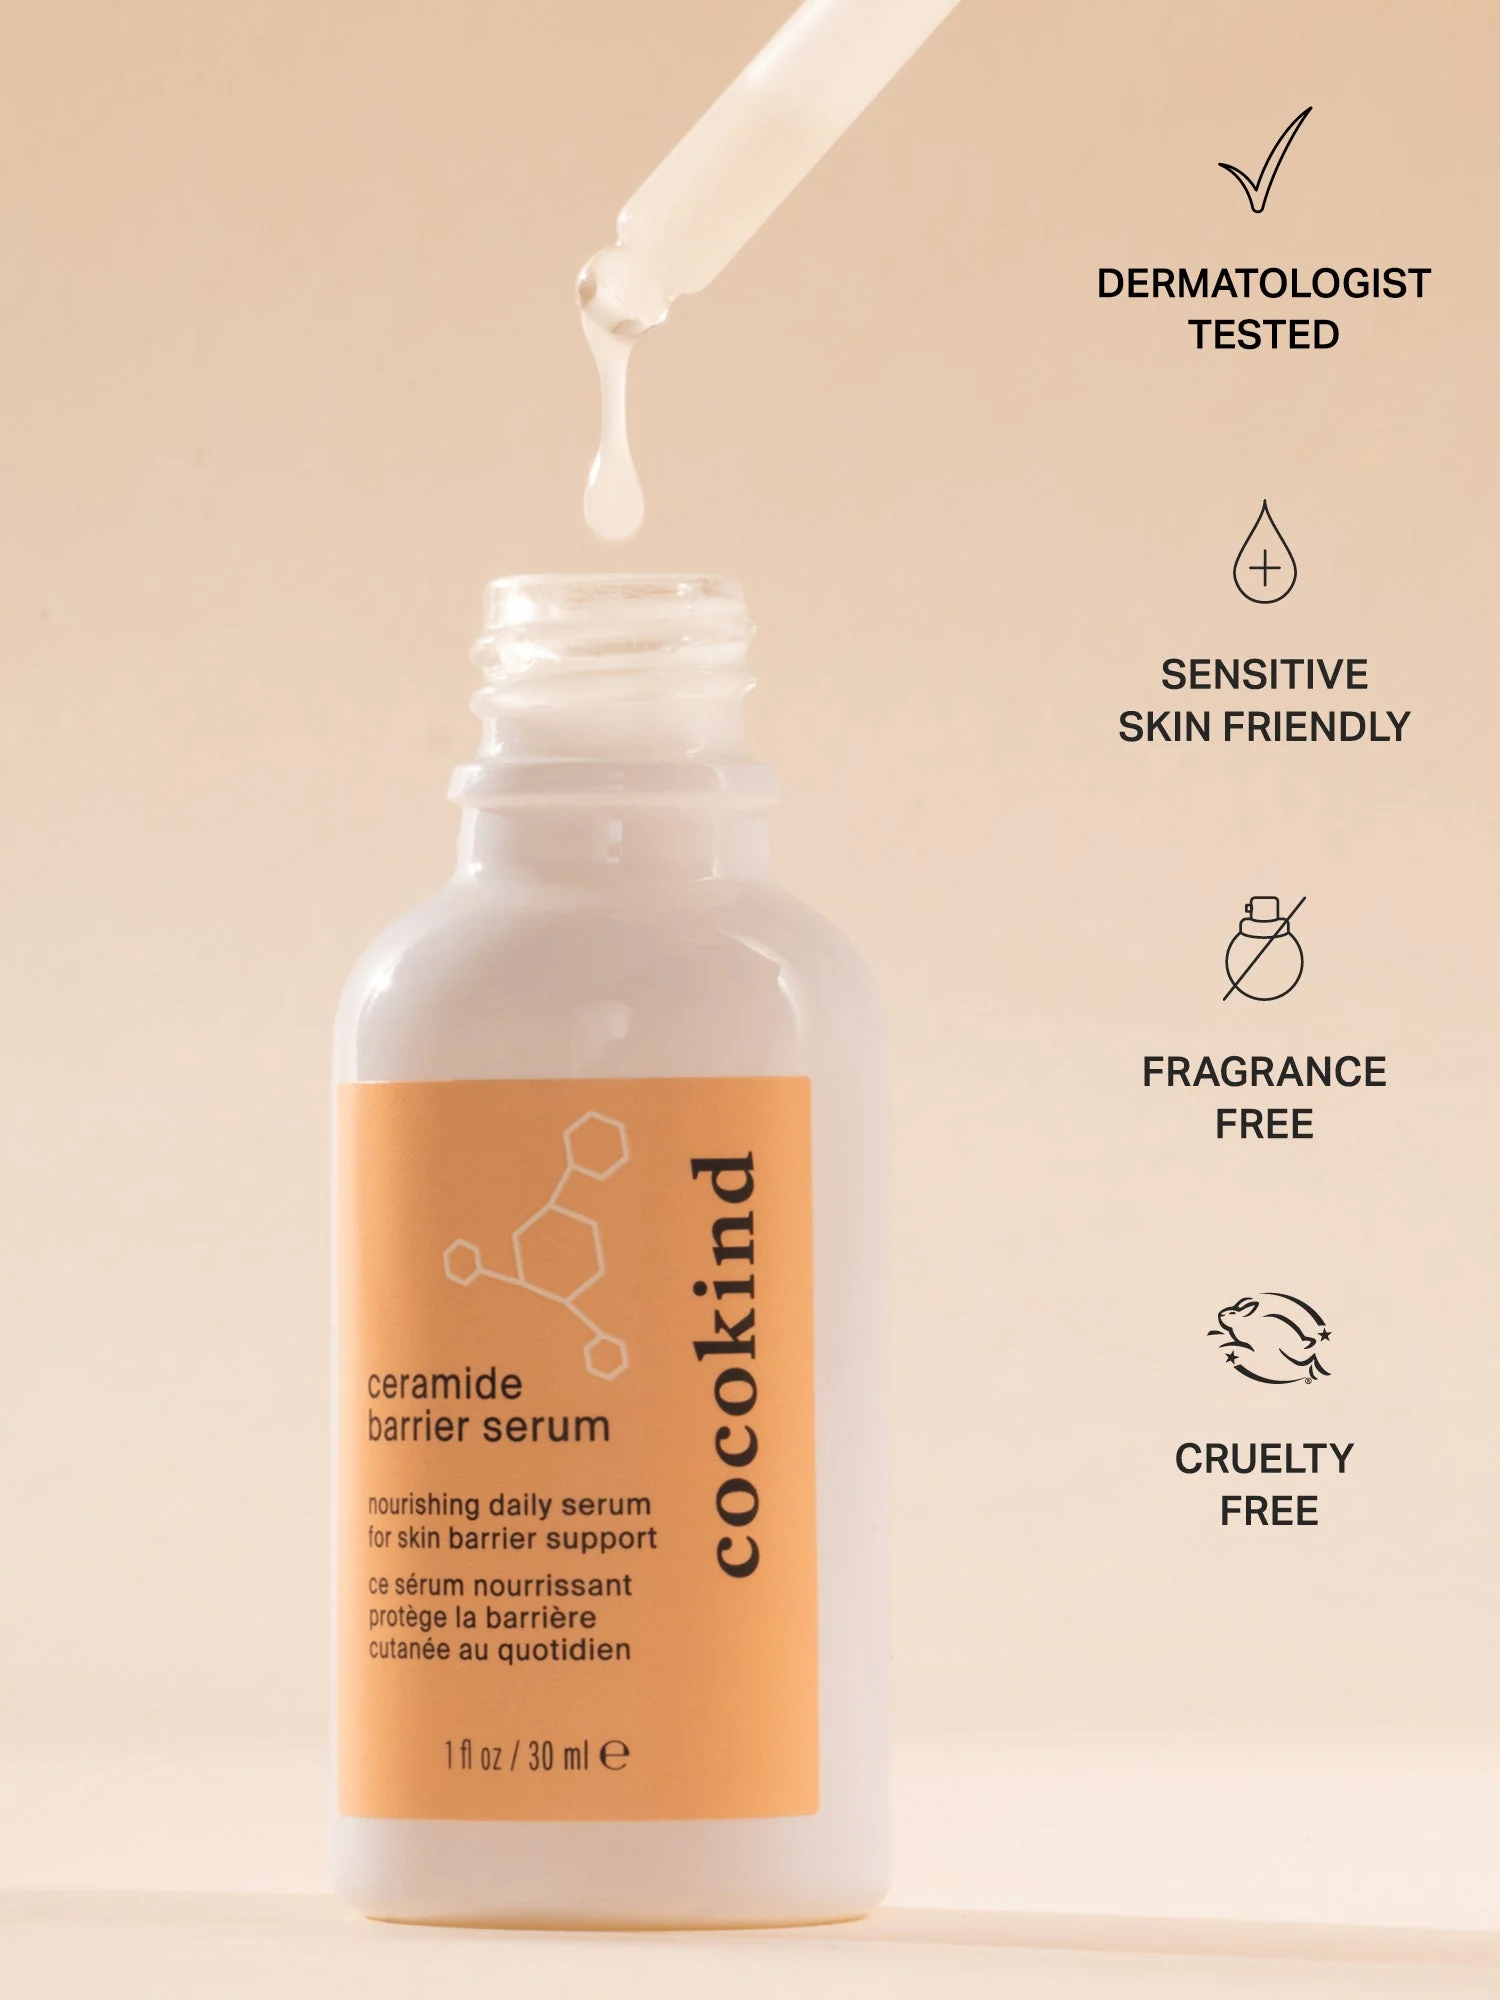 Cocokind Ceramide Barrier Serum: A Sustainable Choice for Conscious Skincare